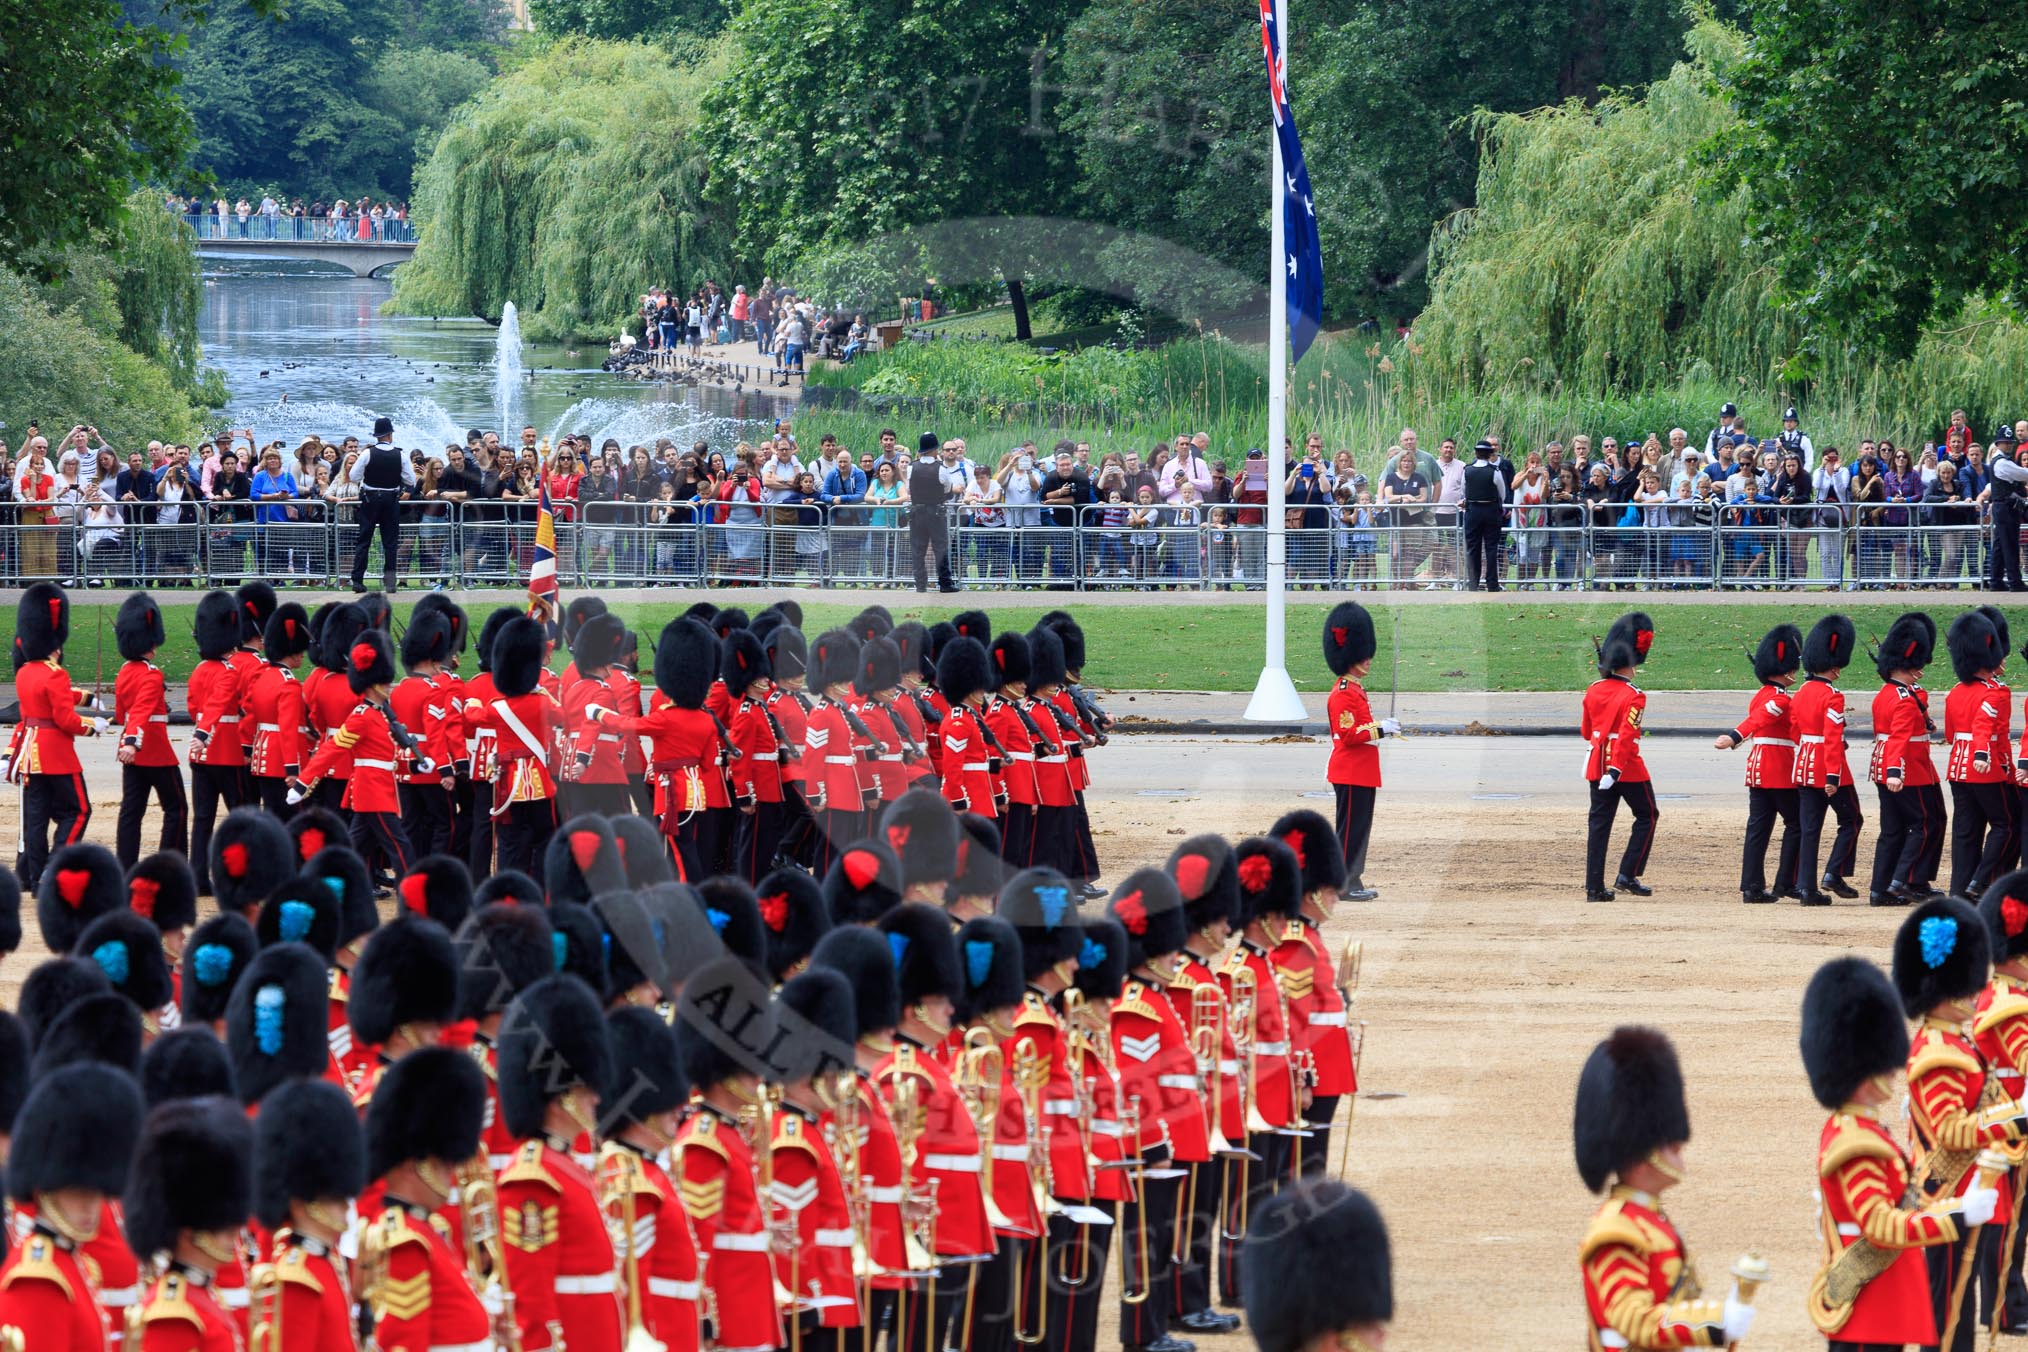 during The Colonel's Review {iptcyear4} (final rehearsal for Trooping the Colour, The Queen's Birthday Parade)  at Horse Guards Parade, Westminster, London, 2 June 2018, 12:08.